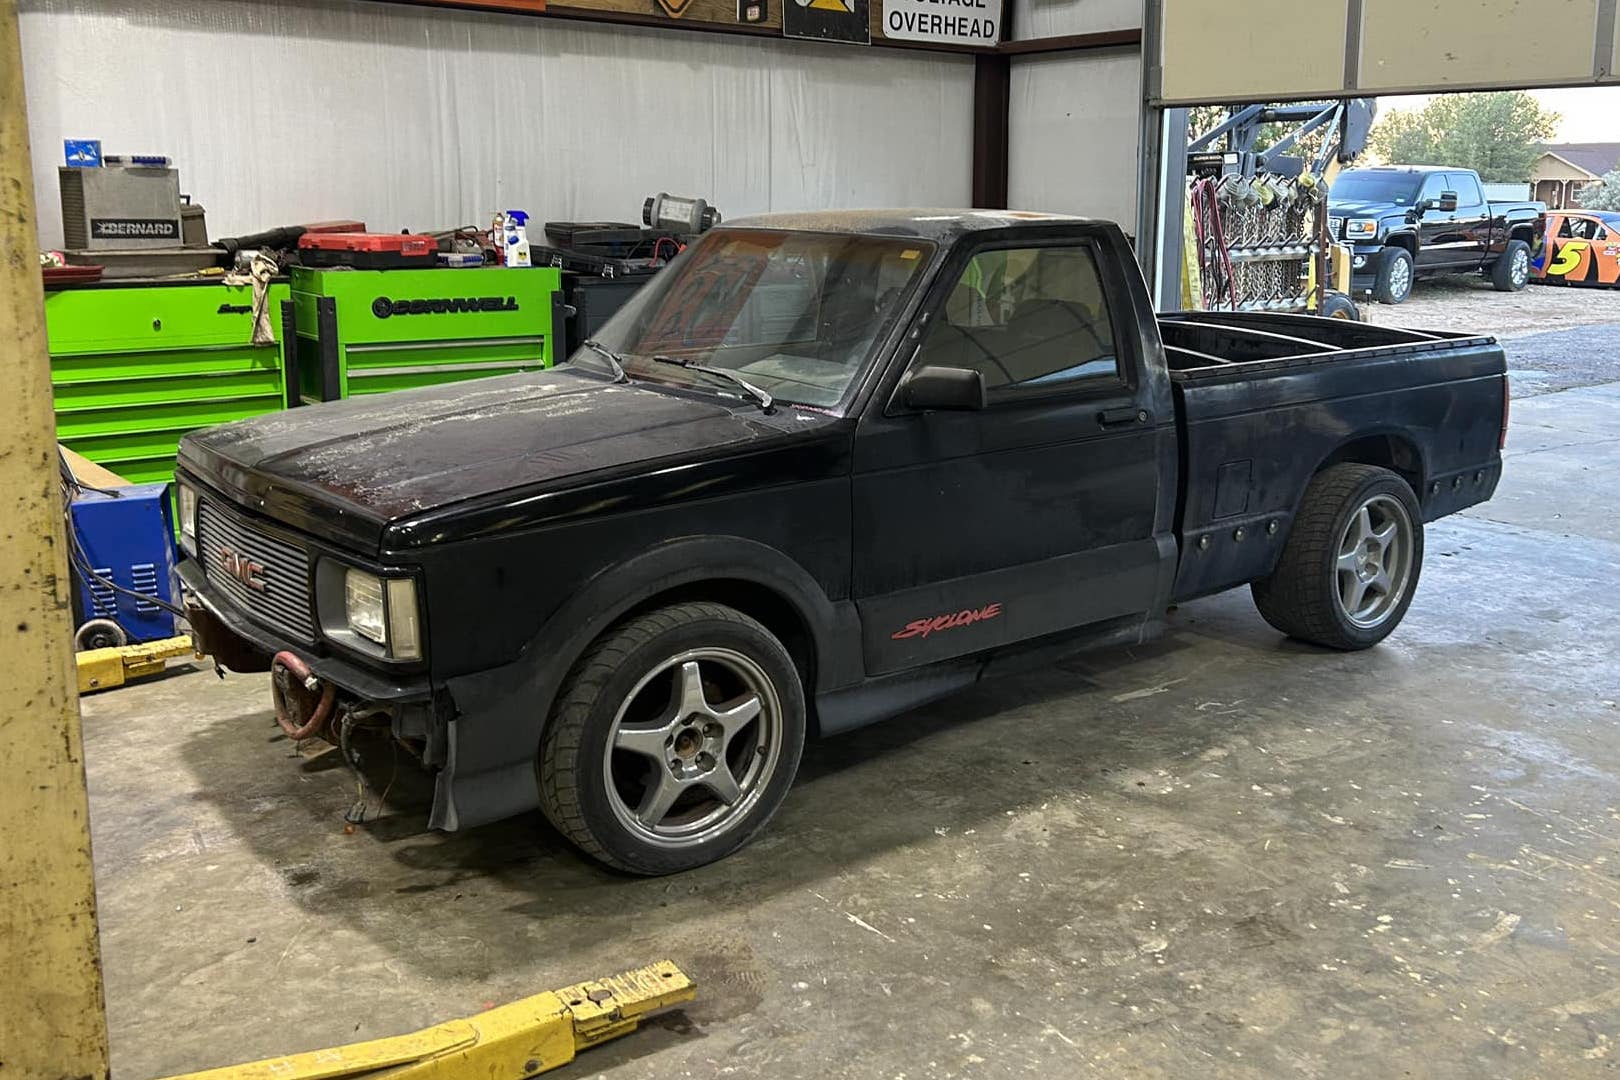 GMC Syclone without its front bumper, sitting in a garage bay with a lift